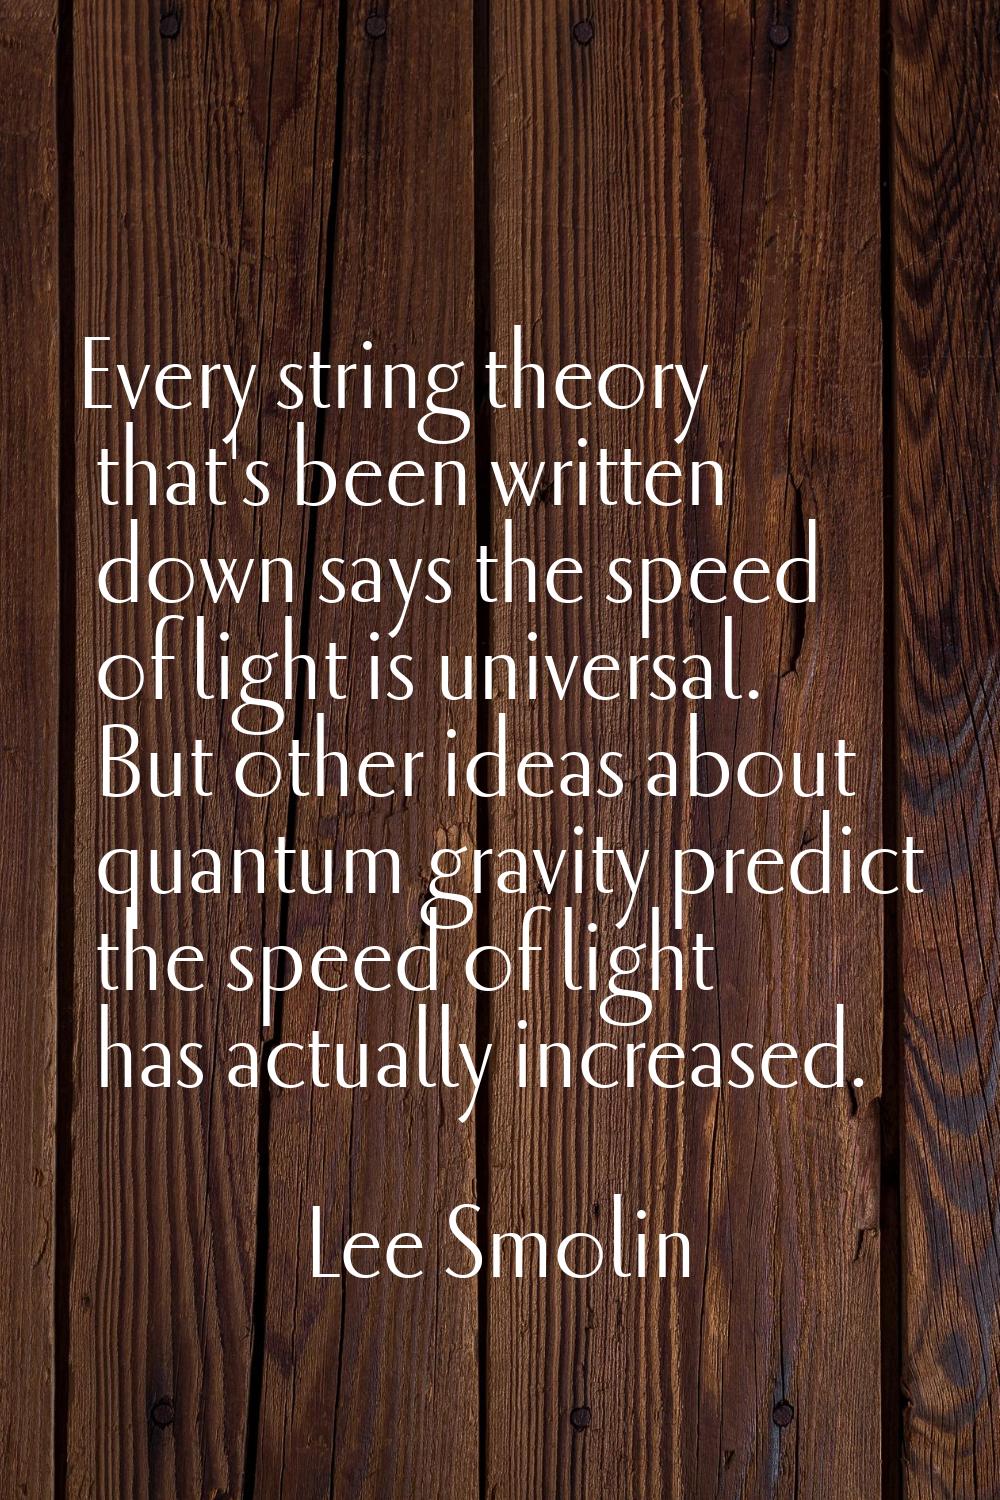 Every string theory that's been written down says the speed of light is universal. But other ideas 